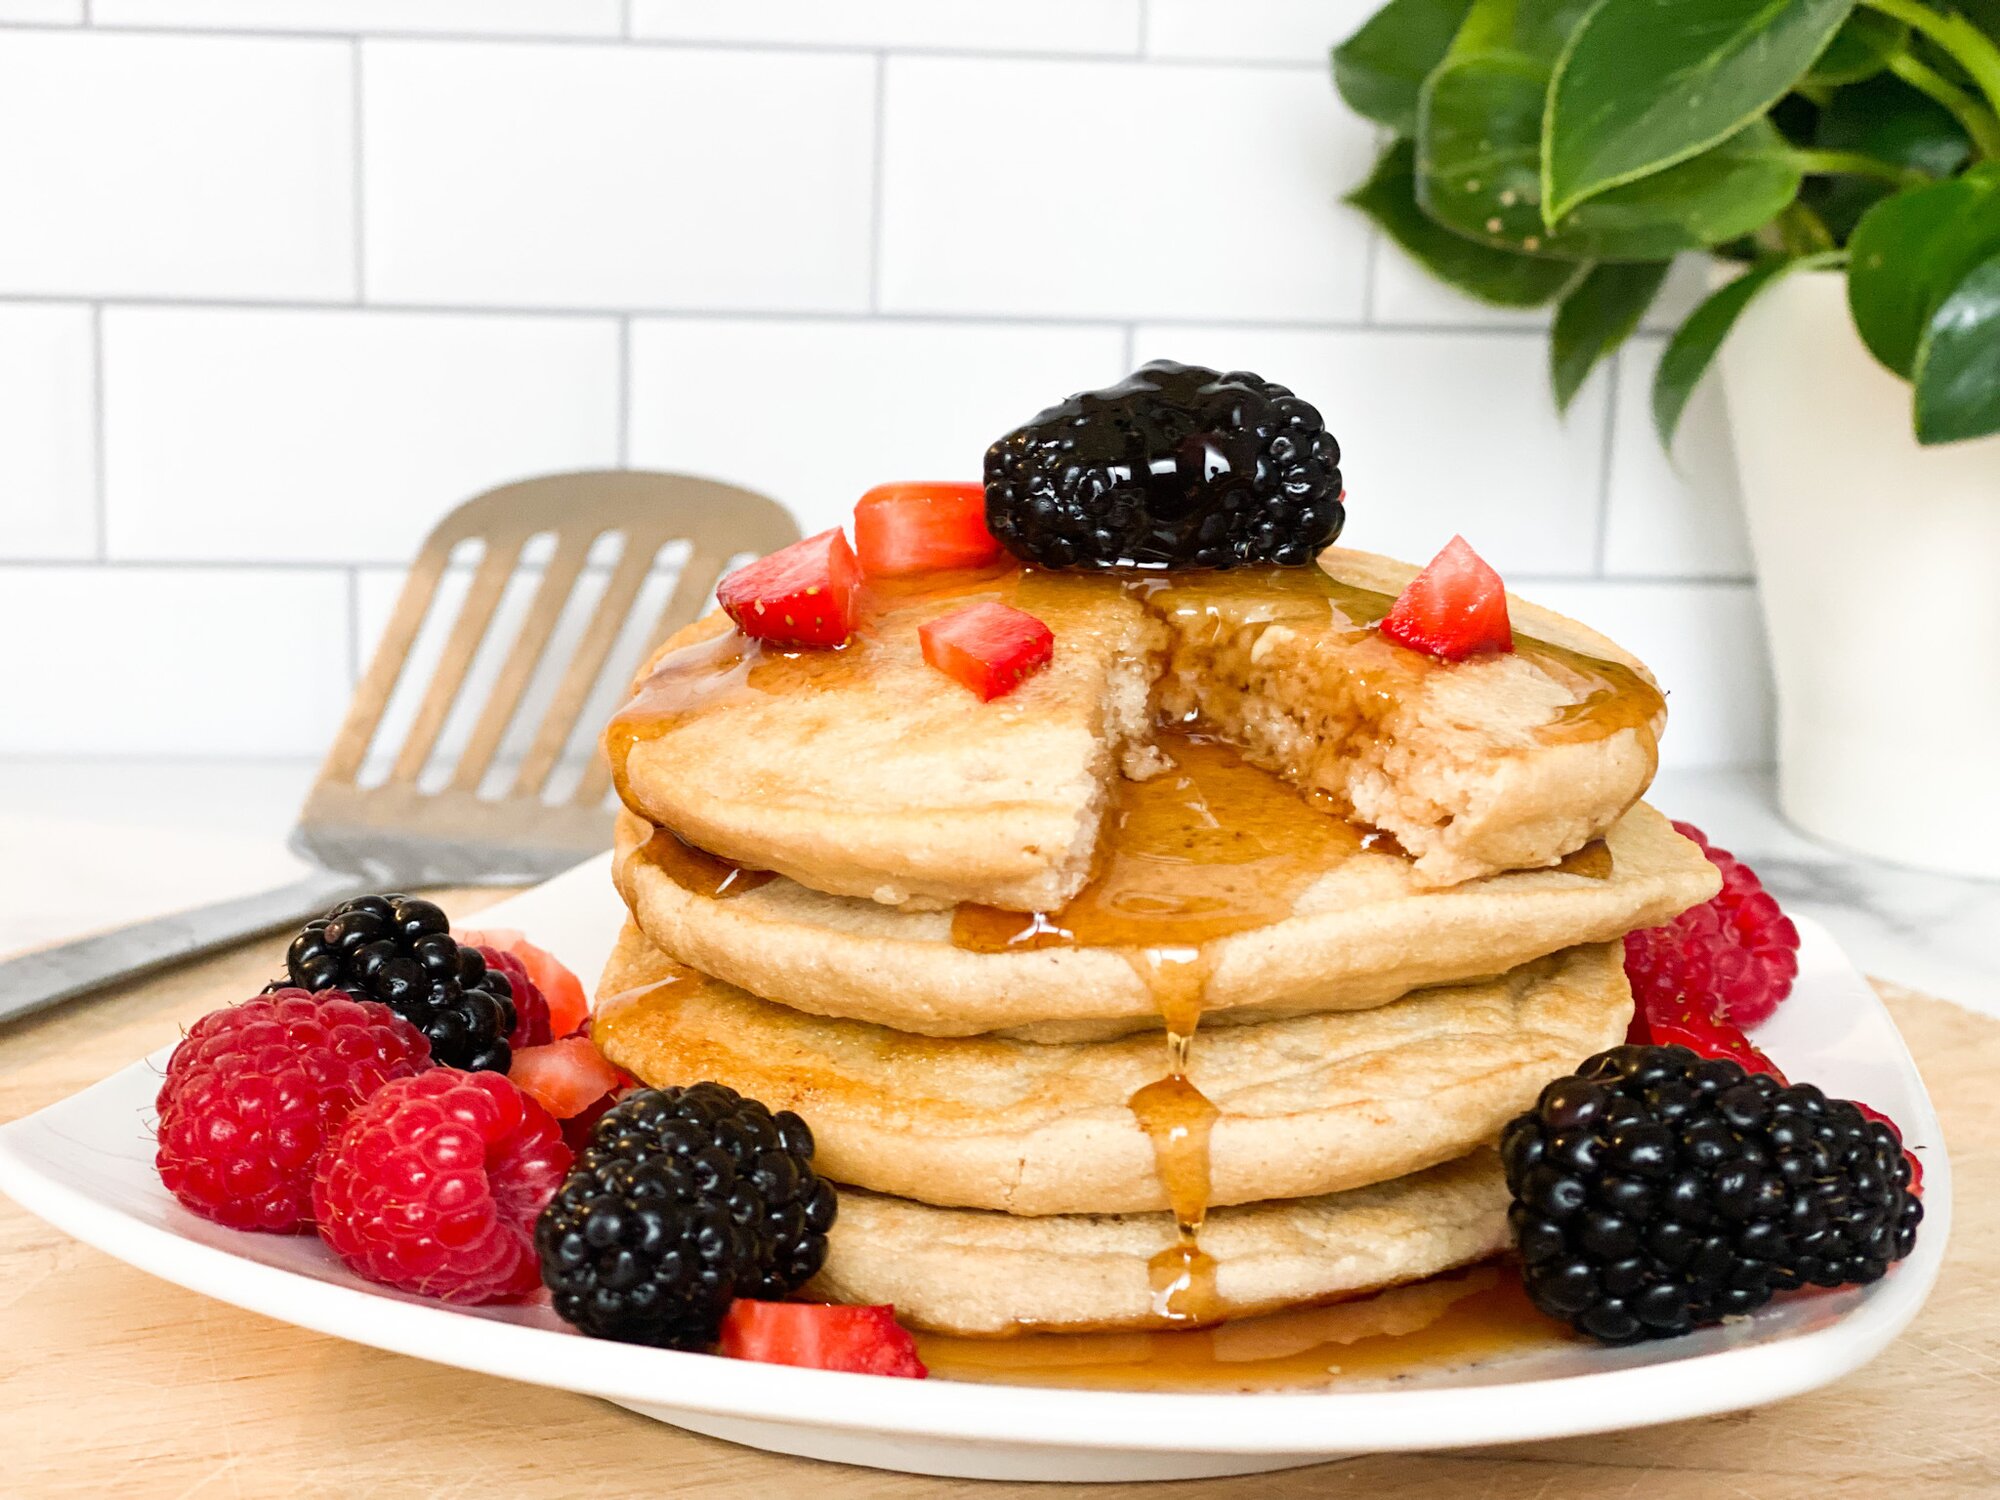 A front view of a plate of pancakes topped with berries and maple syrup with a piece cut out from it